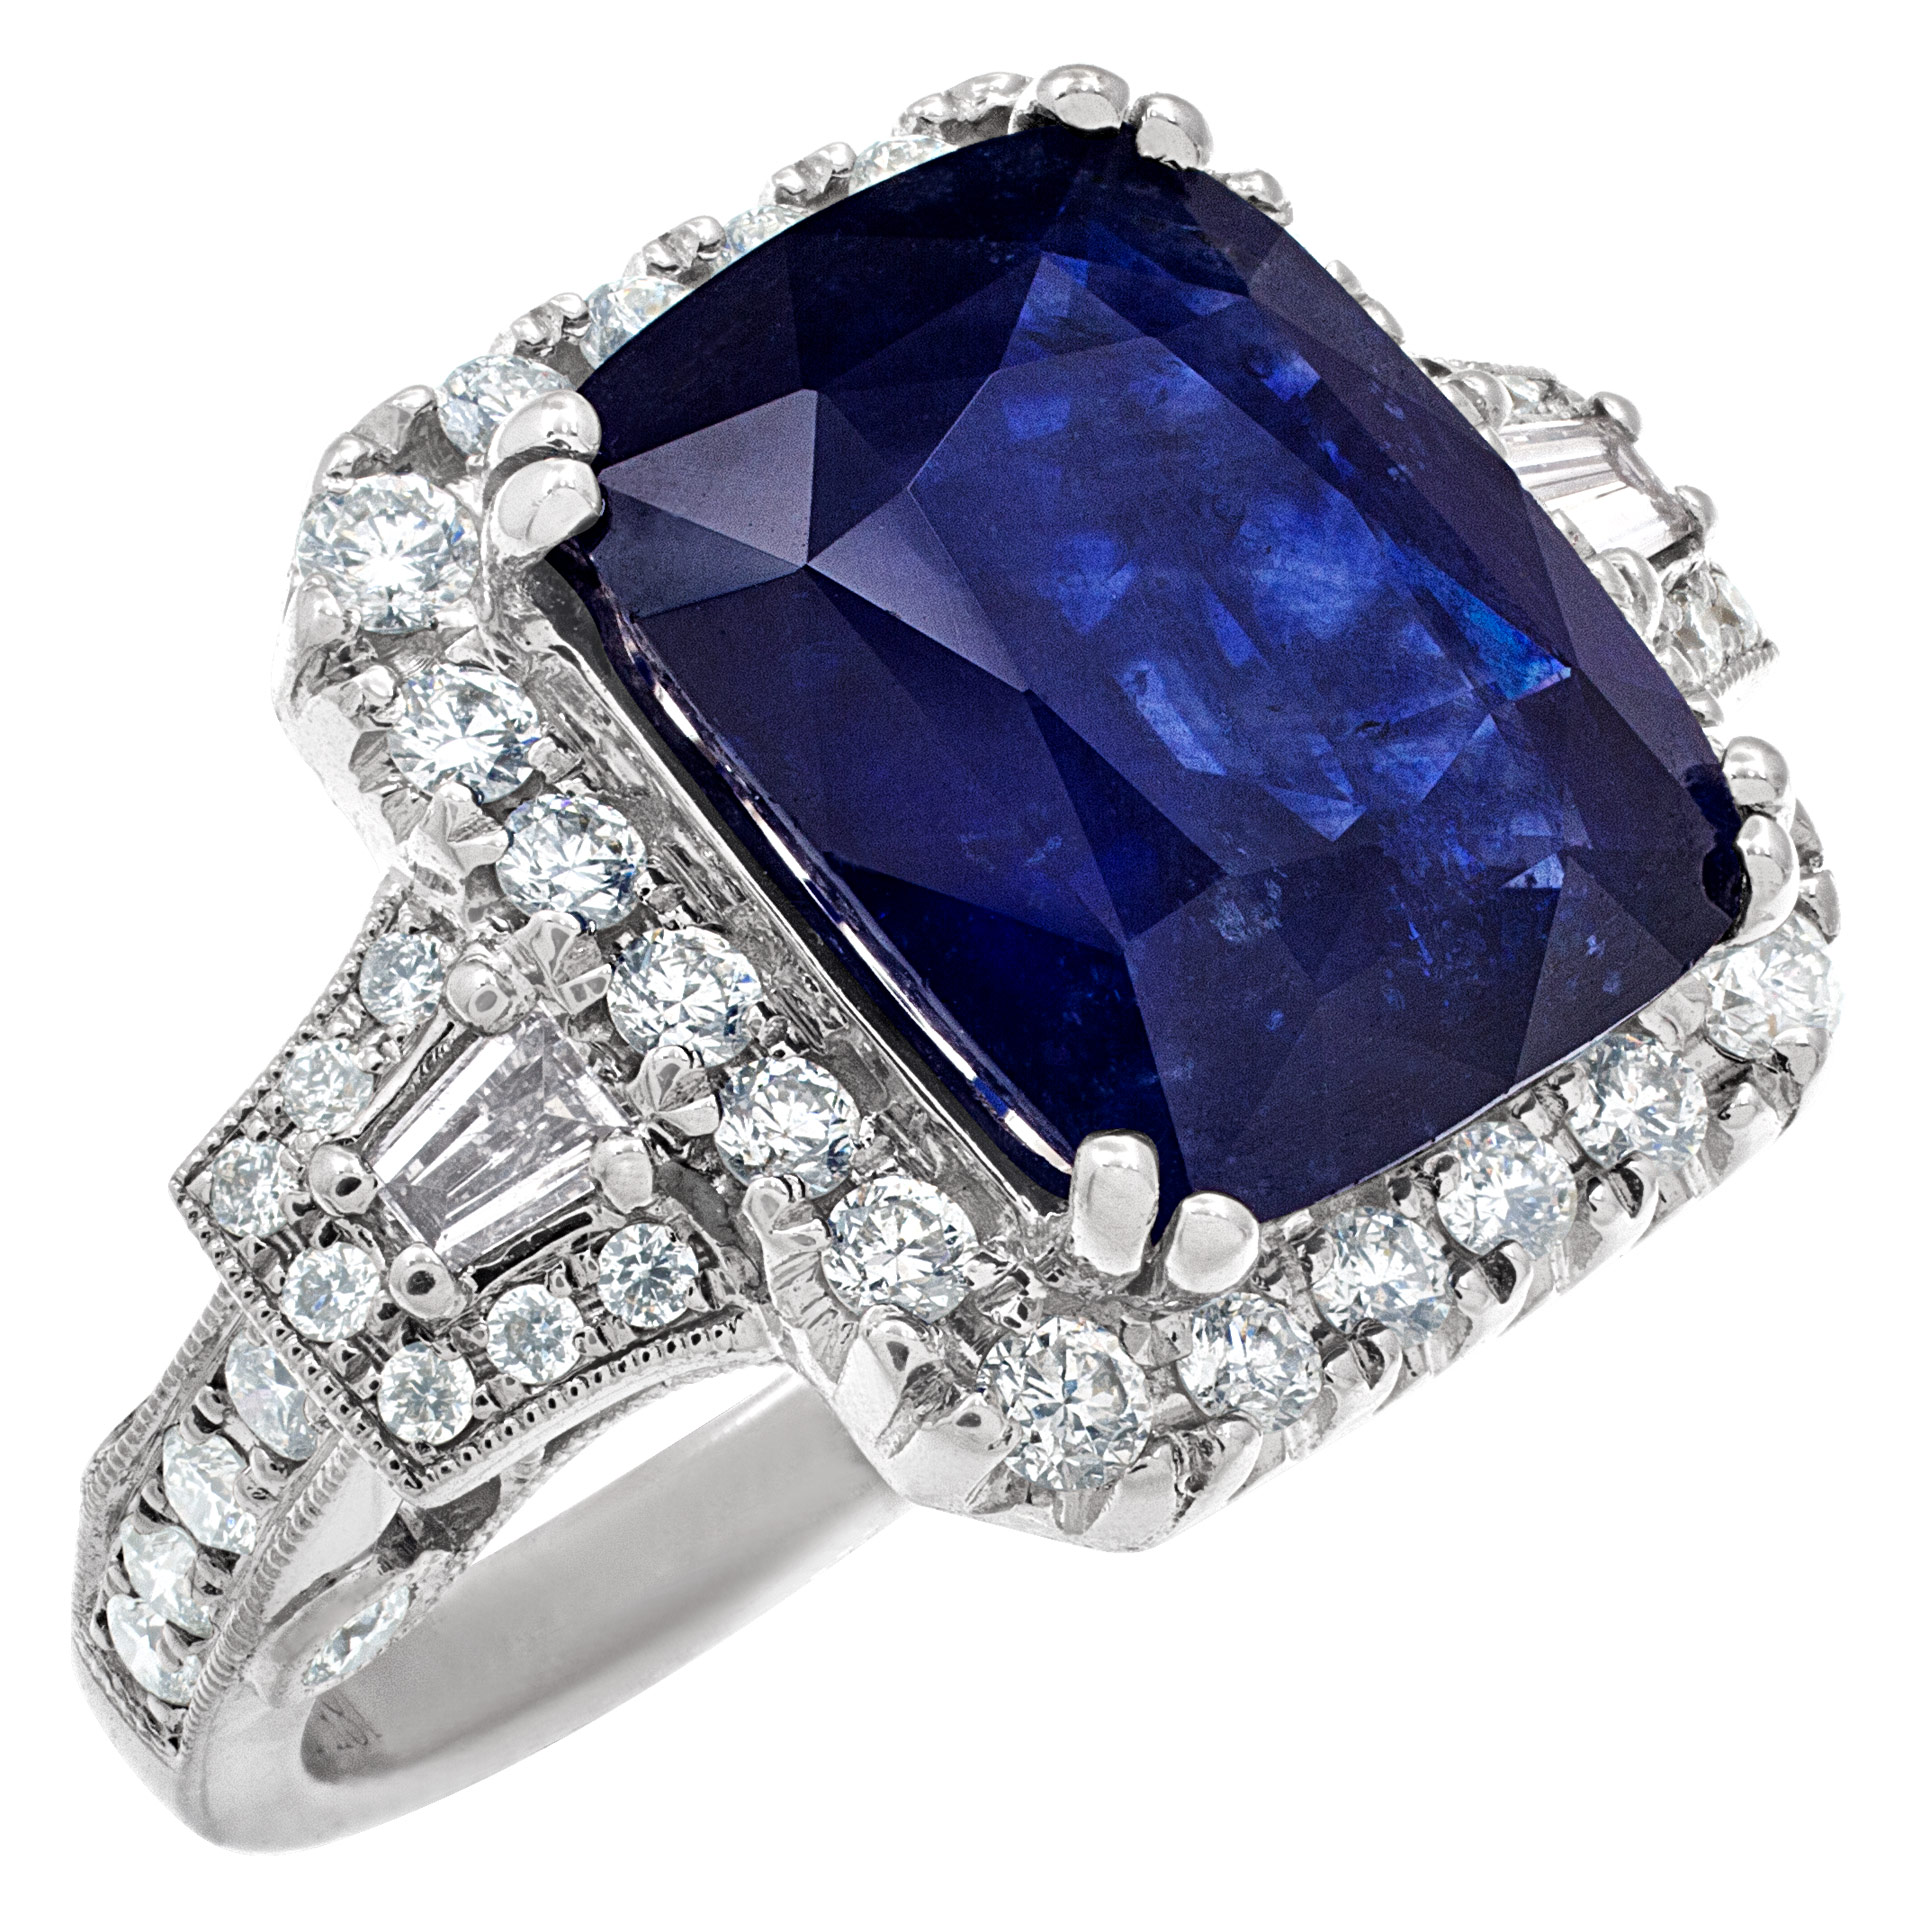 Beautiful 7.26 carats blue sapphire and diamond ring in 18k white gold image 2